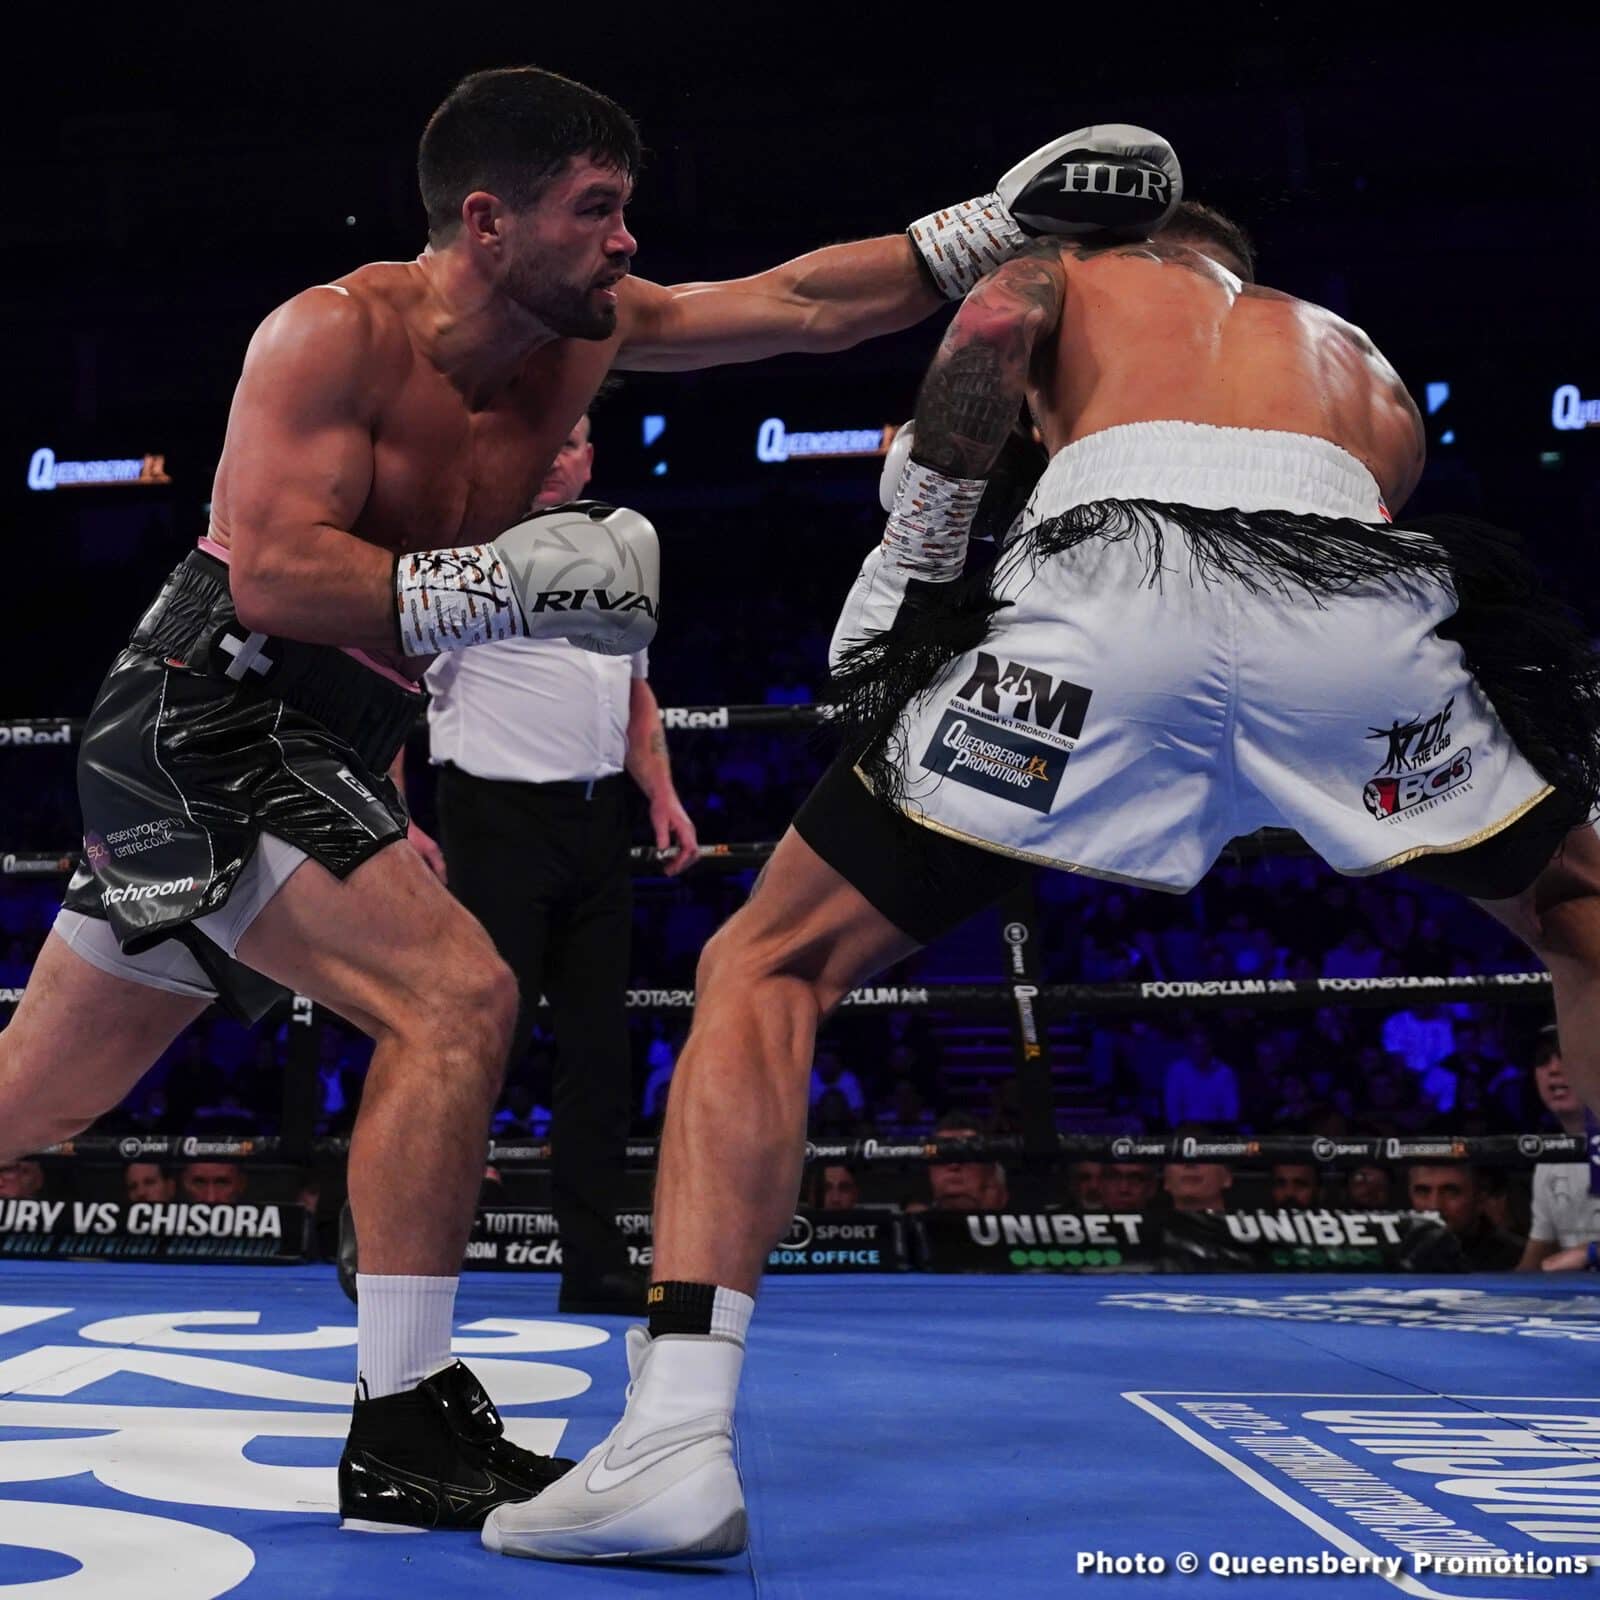 Ryder beats Parker, wins WBO interim super middle title - Boxing Results